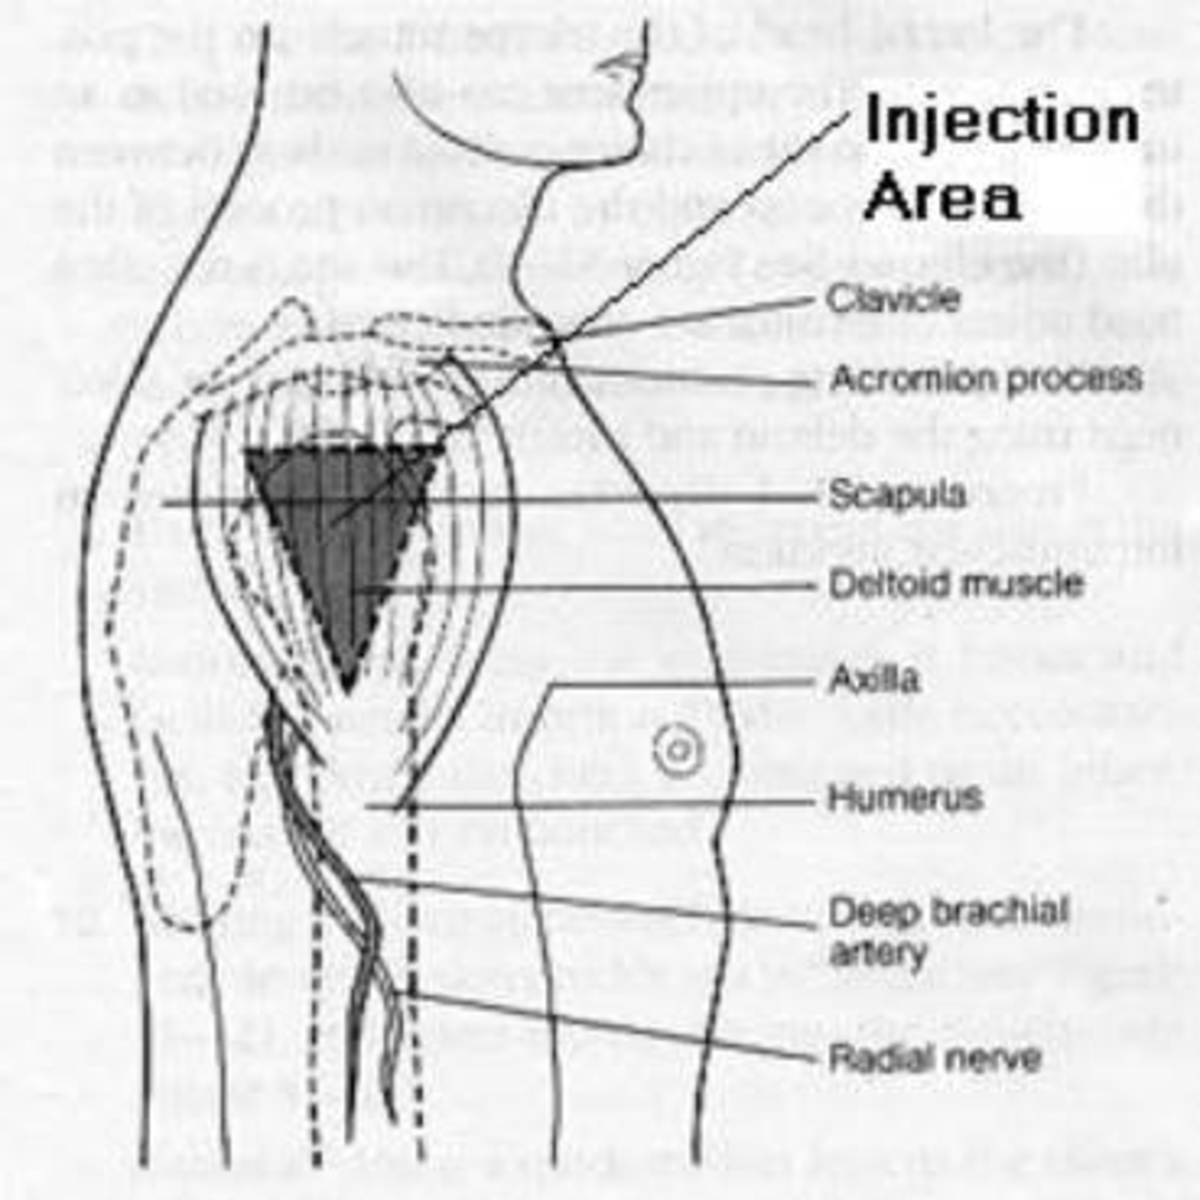 This diagram shows exactly where the anatomical marks are located to help visualize the deltoid intramuscular injection sites location.